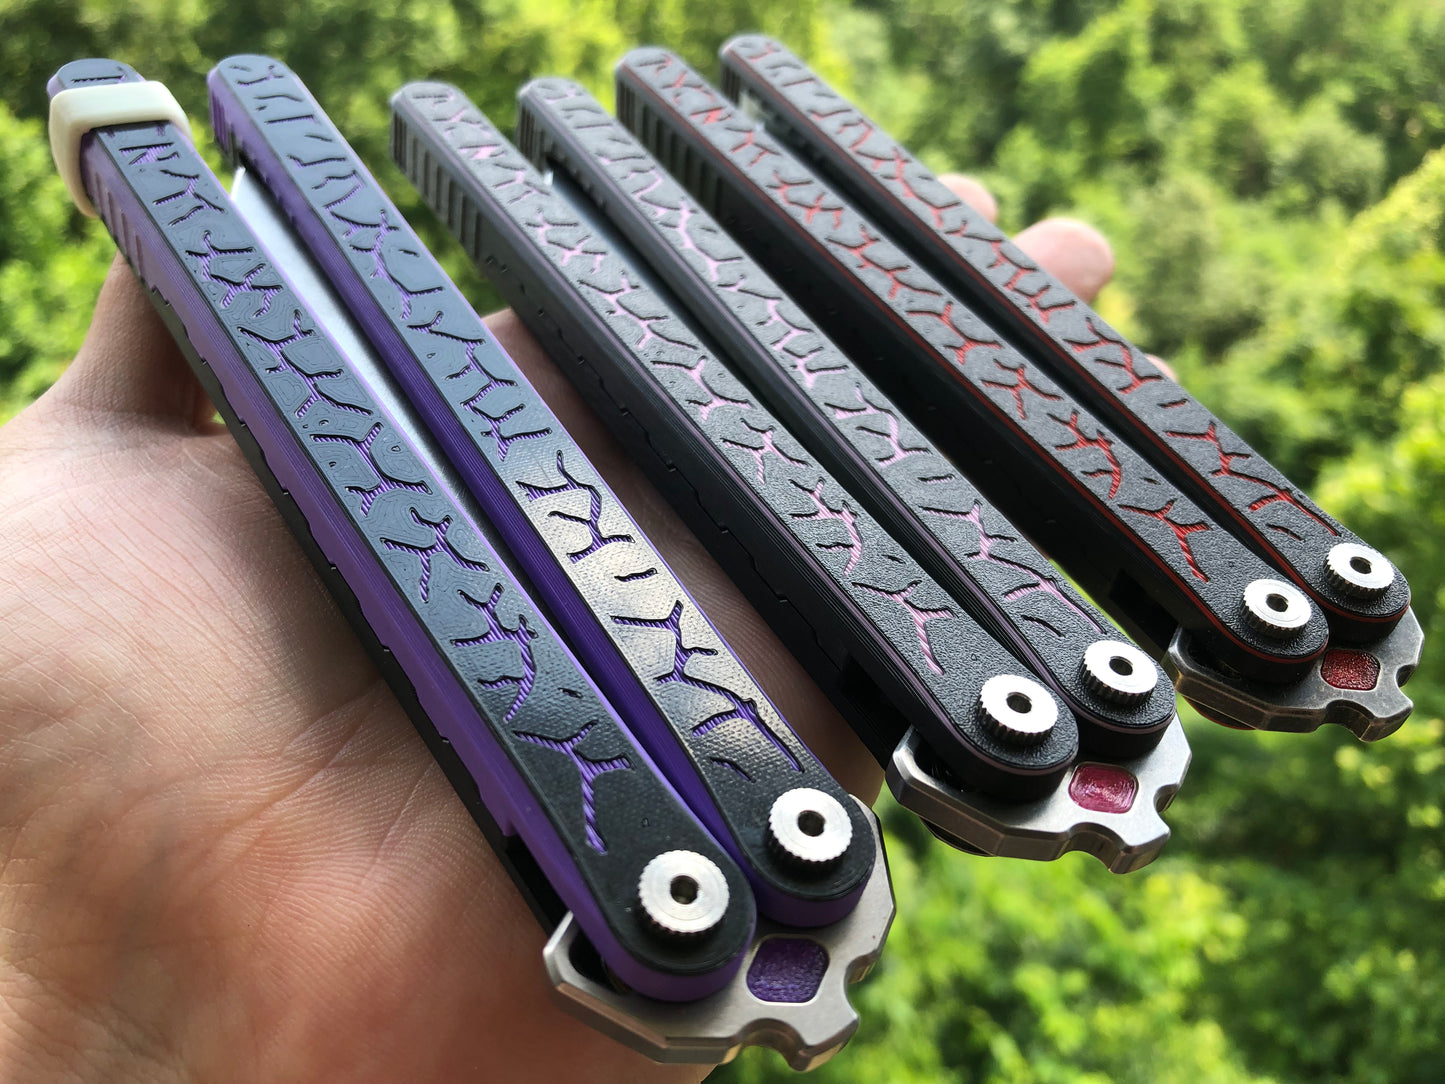 ZippyLucha Handles (aka ZLucha) are back and better than ever in the v2. ZLucha handles are a set of aftermarket handles for the Kershaw Lucha Balisong (live blade). They lighten the Lucha (3.55 oz), improve the balance for flipping, and introduce the high-performance threadlocker-free Zippy pivot/bearing system.